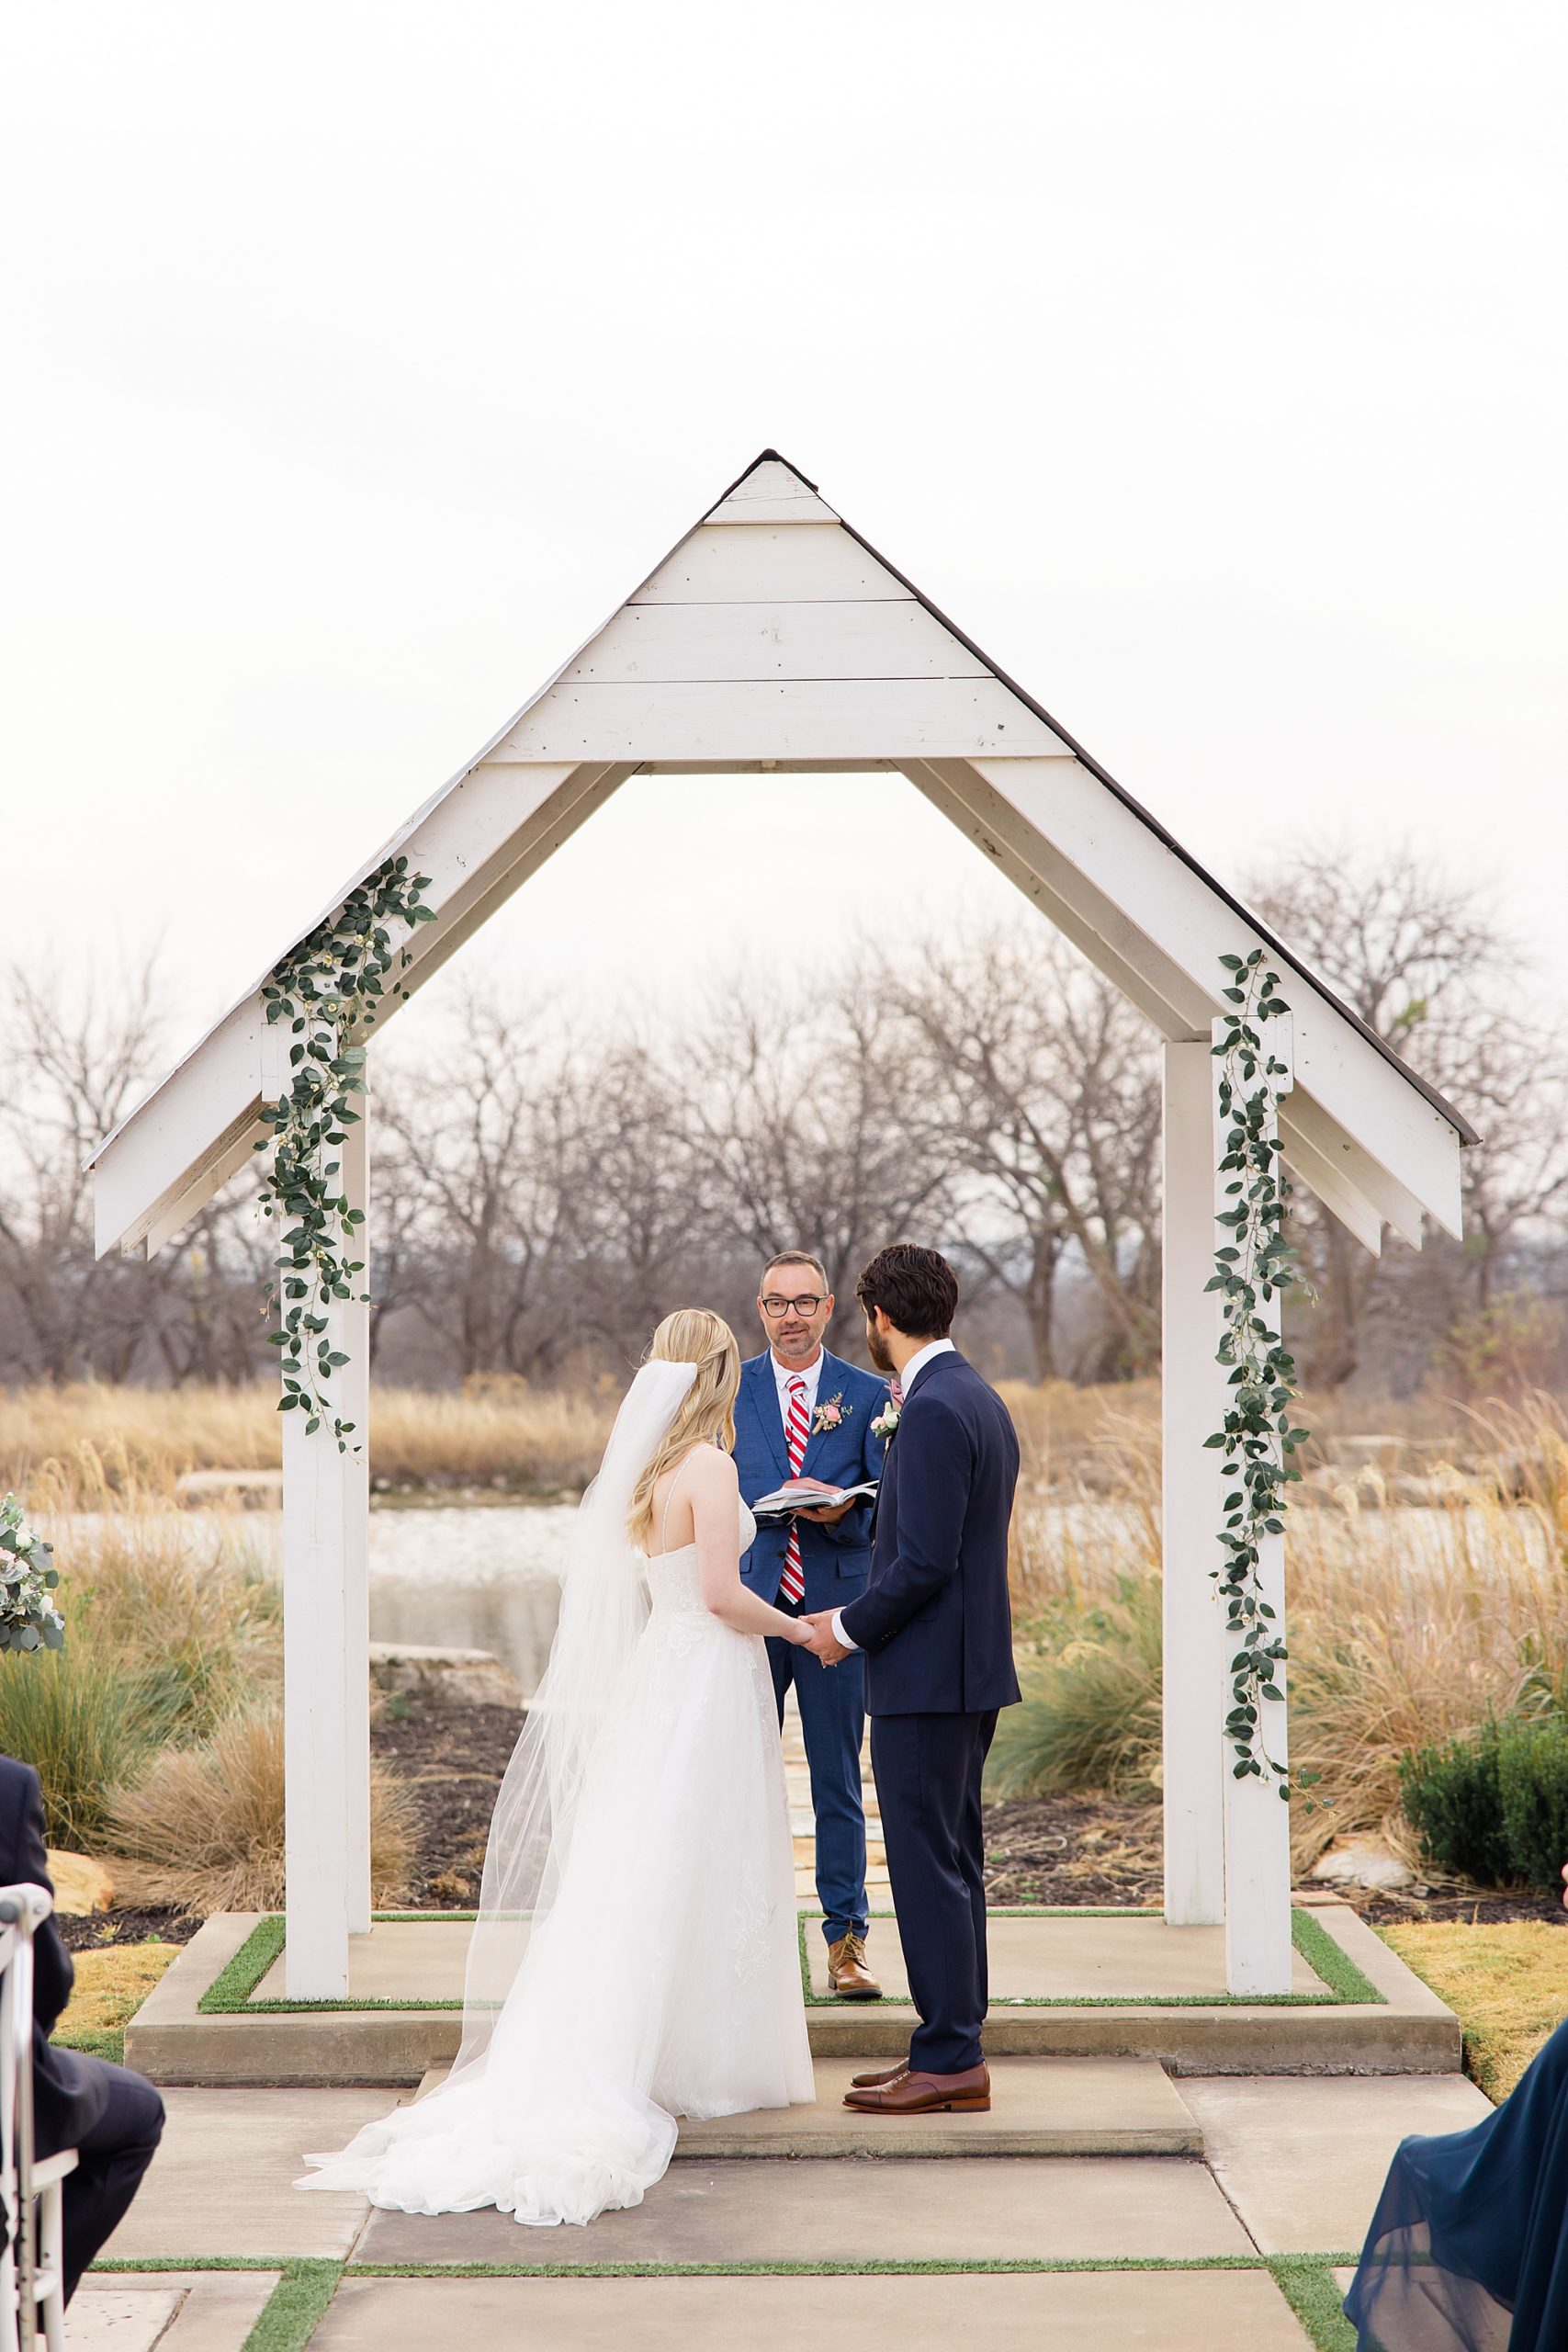 bride and groom exchange vows during outdoor wedding ceremony in the winter